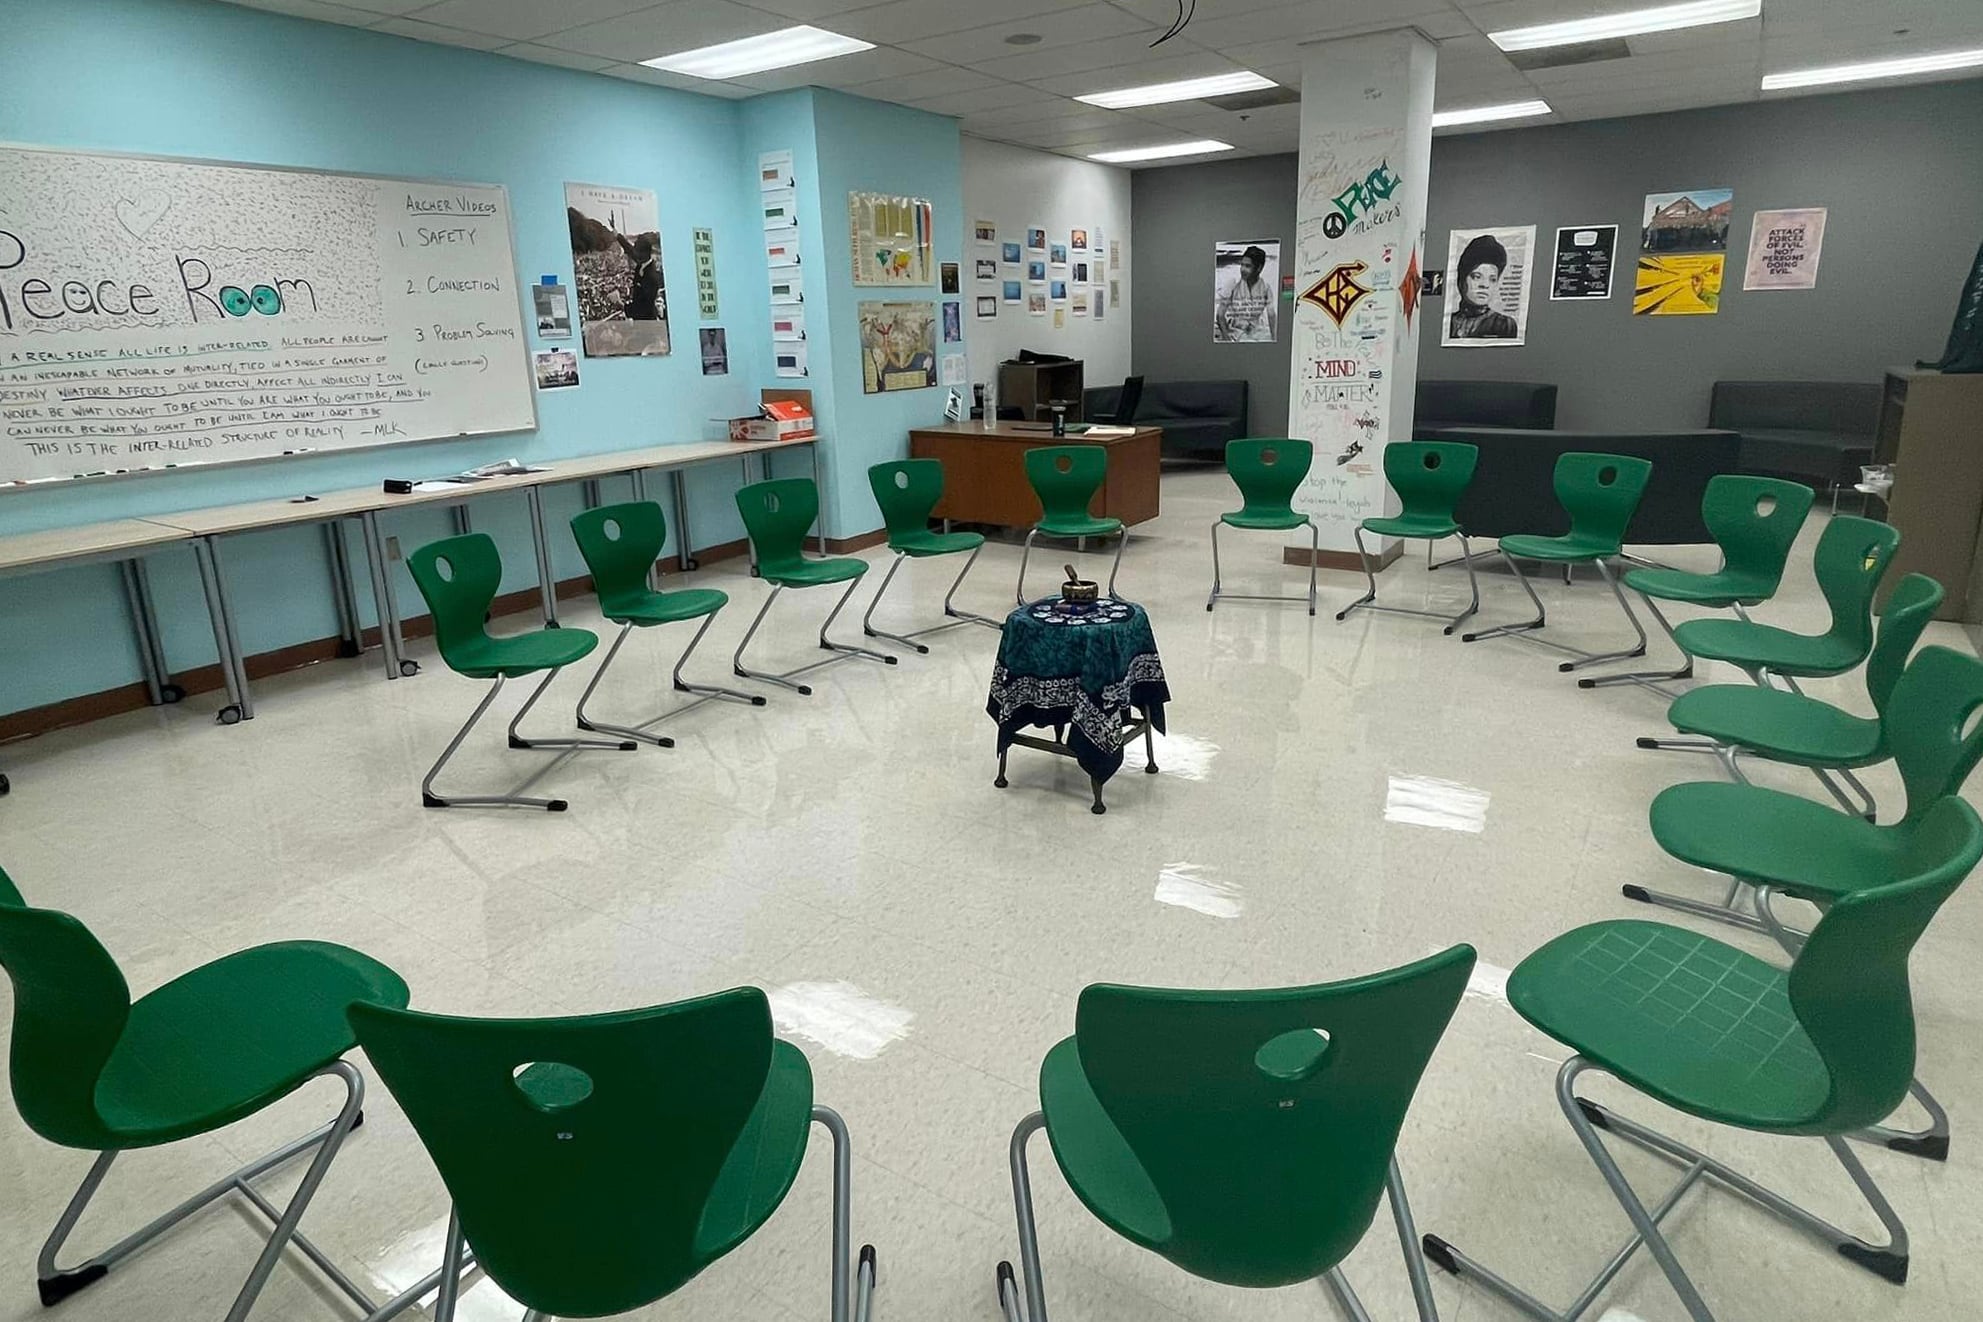 Several green chairs are arranged in an oval in a room with gray walls and a whiteboard.